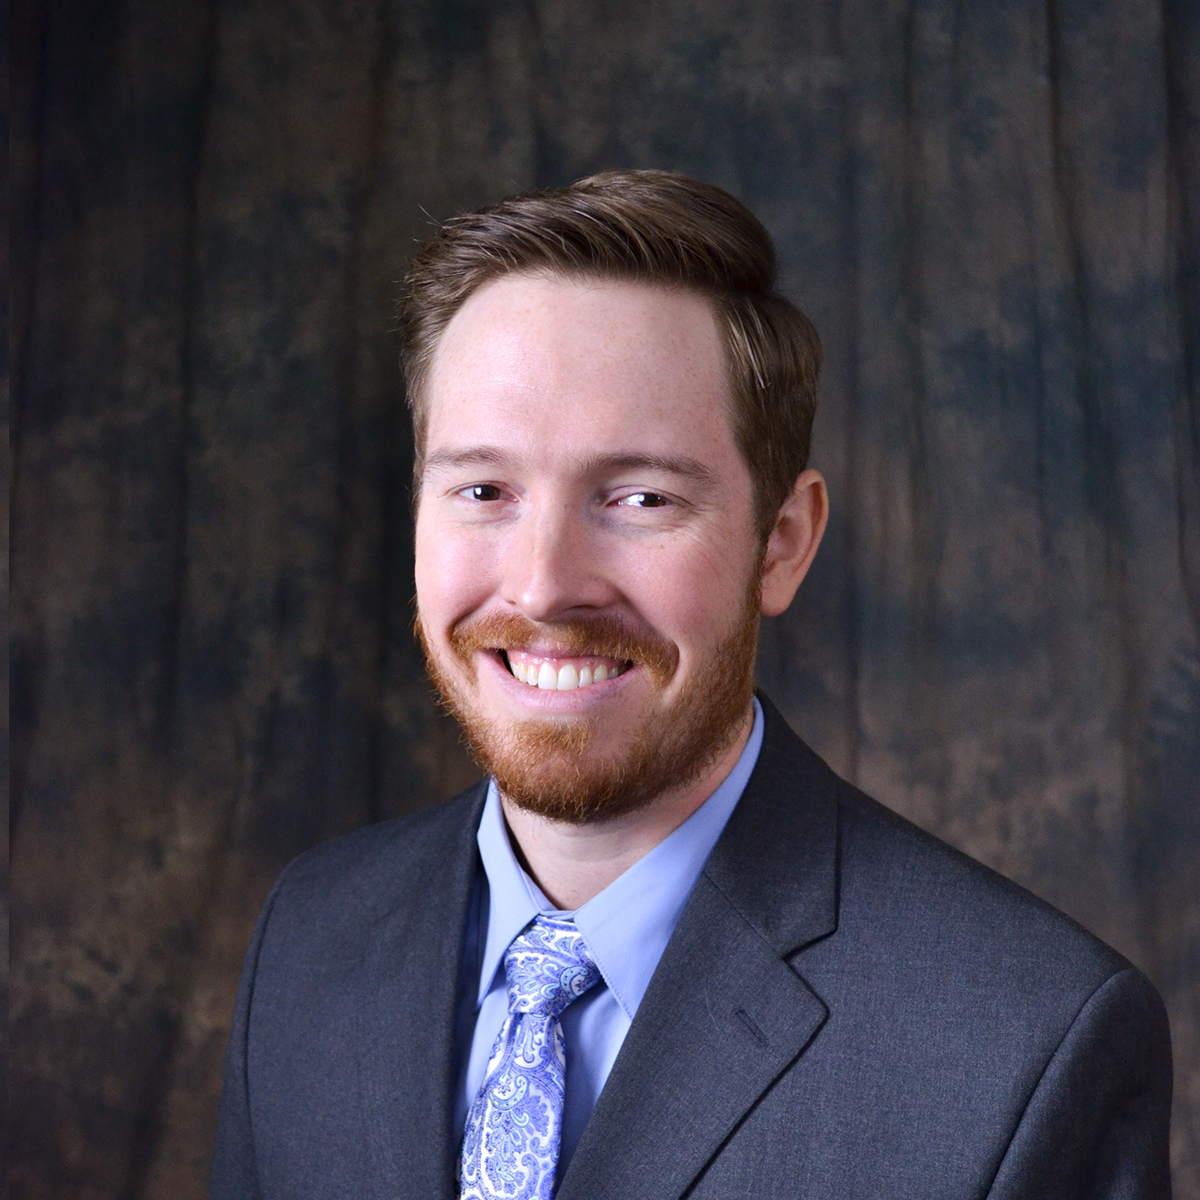 Corey Bloxam, PE, Installed as ASCE East Central Branch Vice President